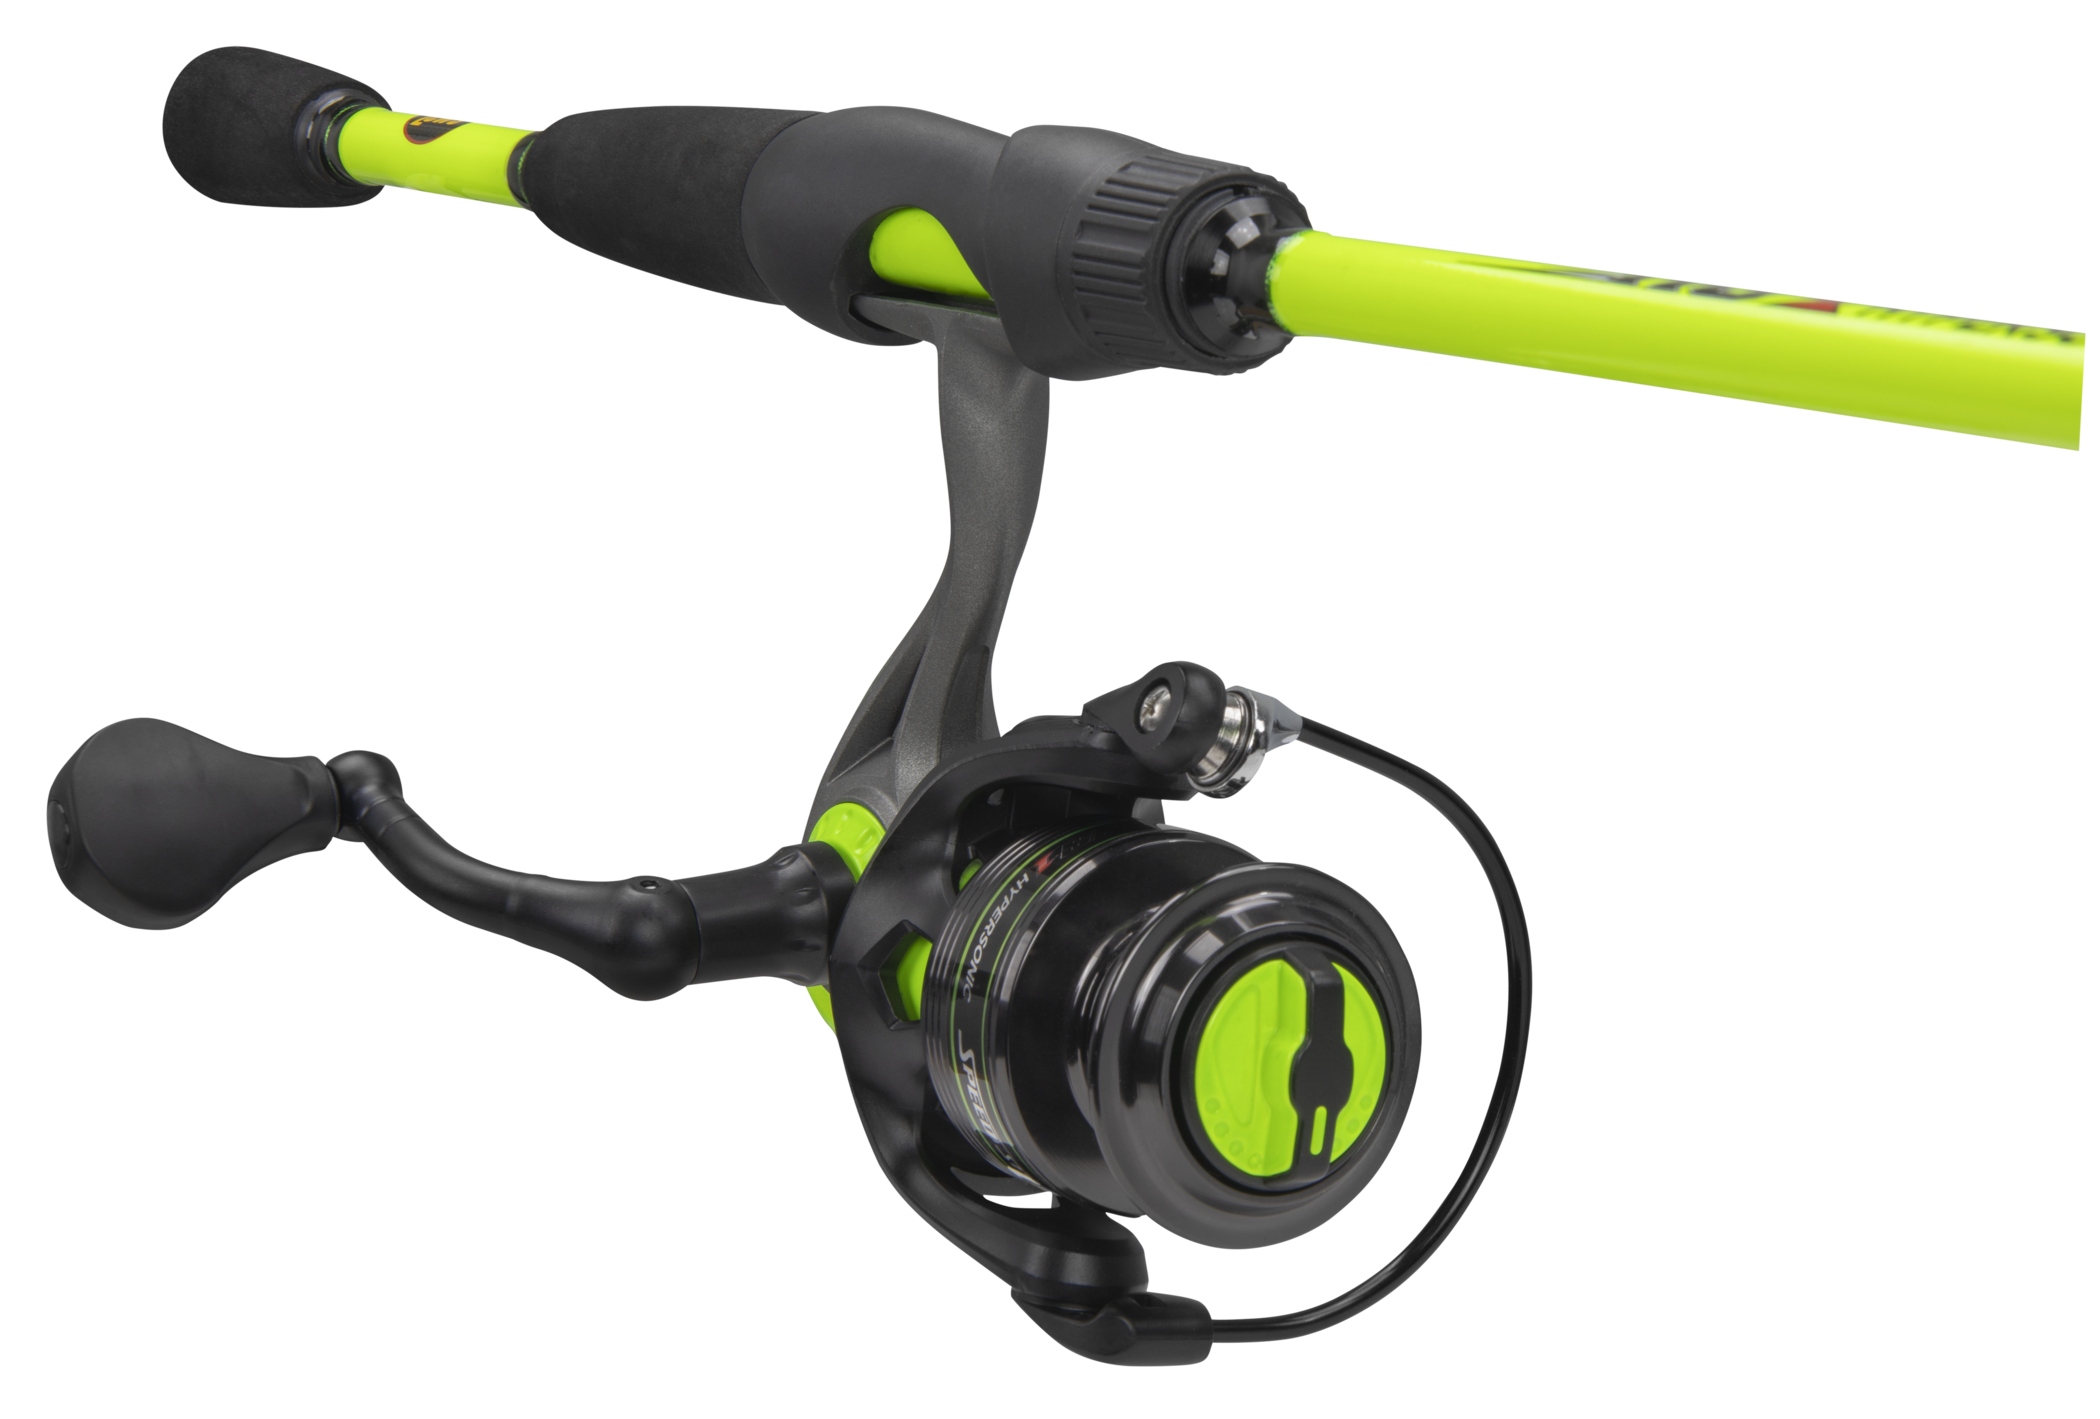 4 Bearings Lews Fishing Ambidextrous 5.1:1 Gear Ratio 66 Length 2pc Medium Power Hypersonic Speed Spin Spinning Combo 